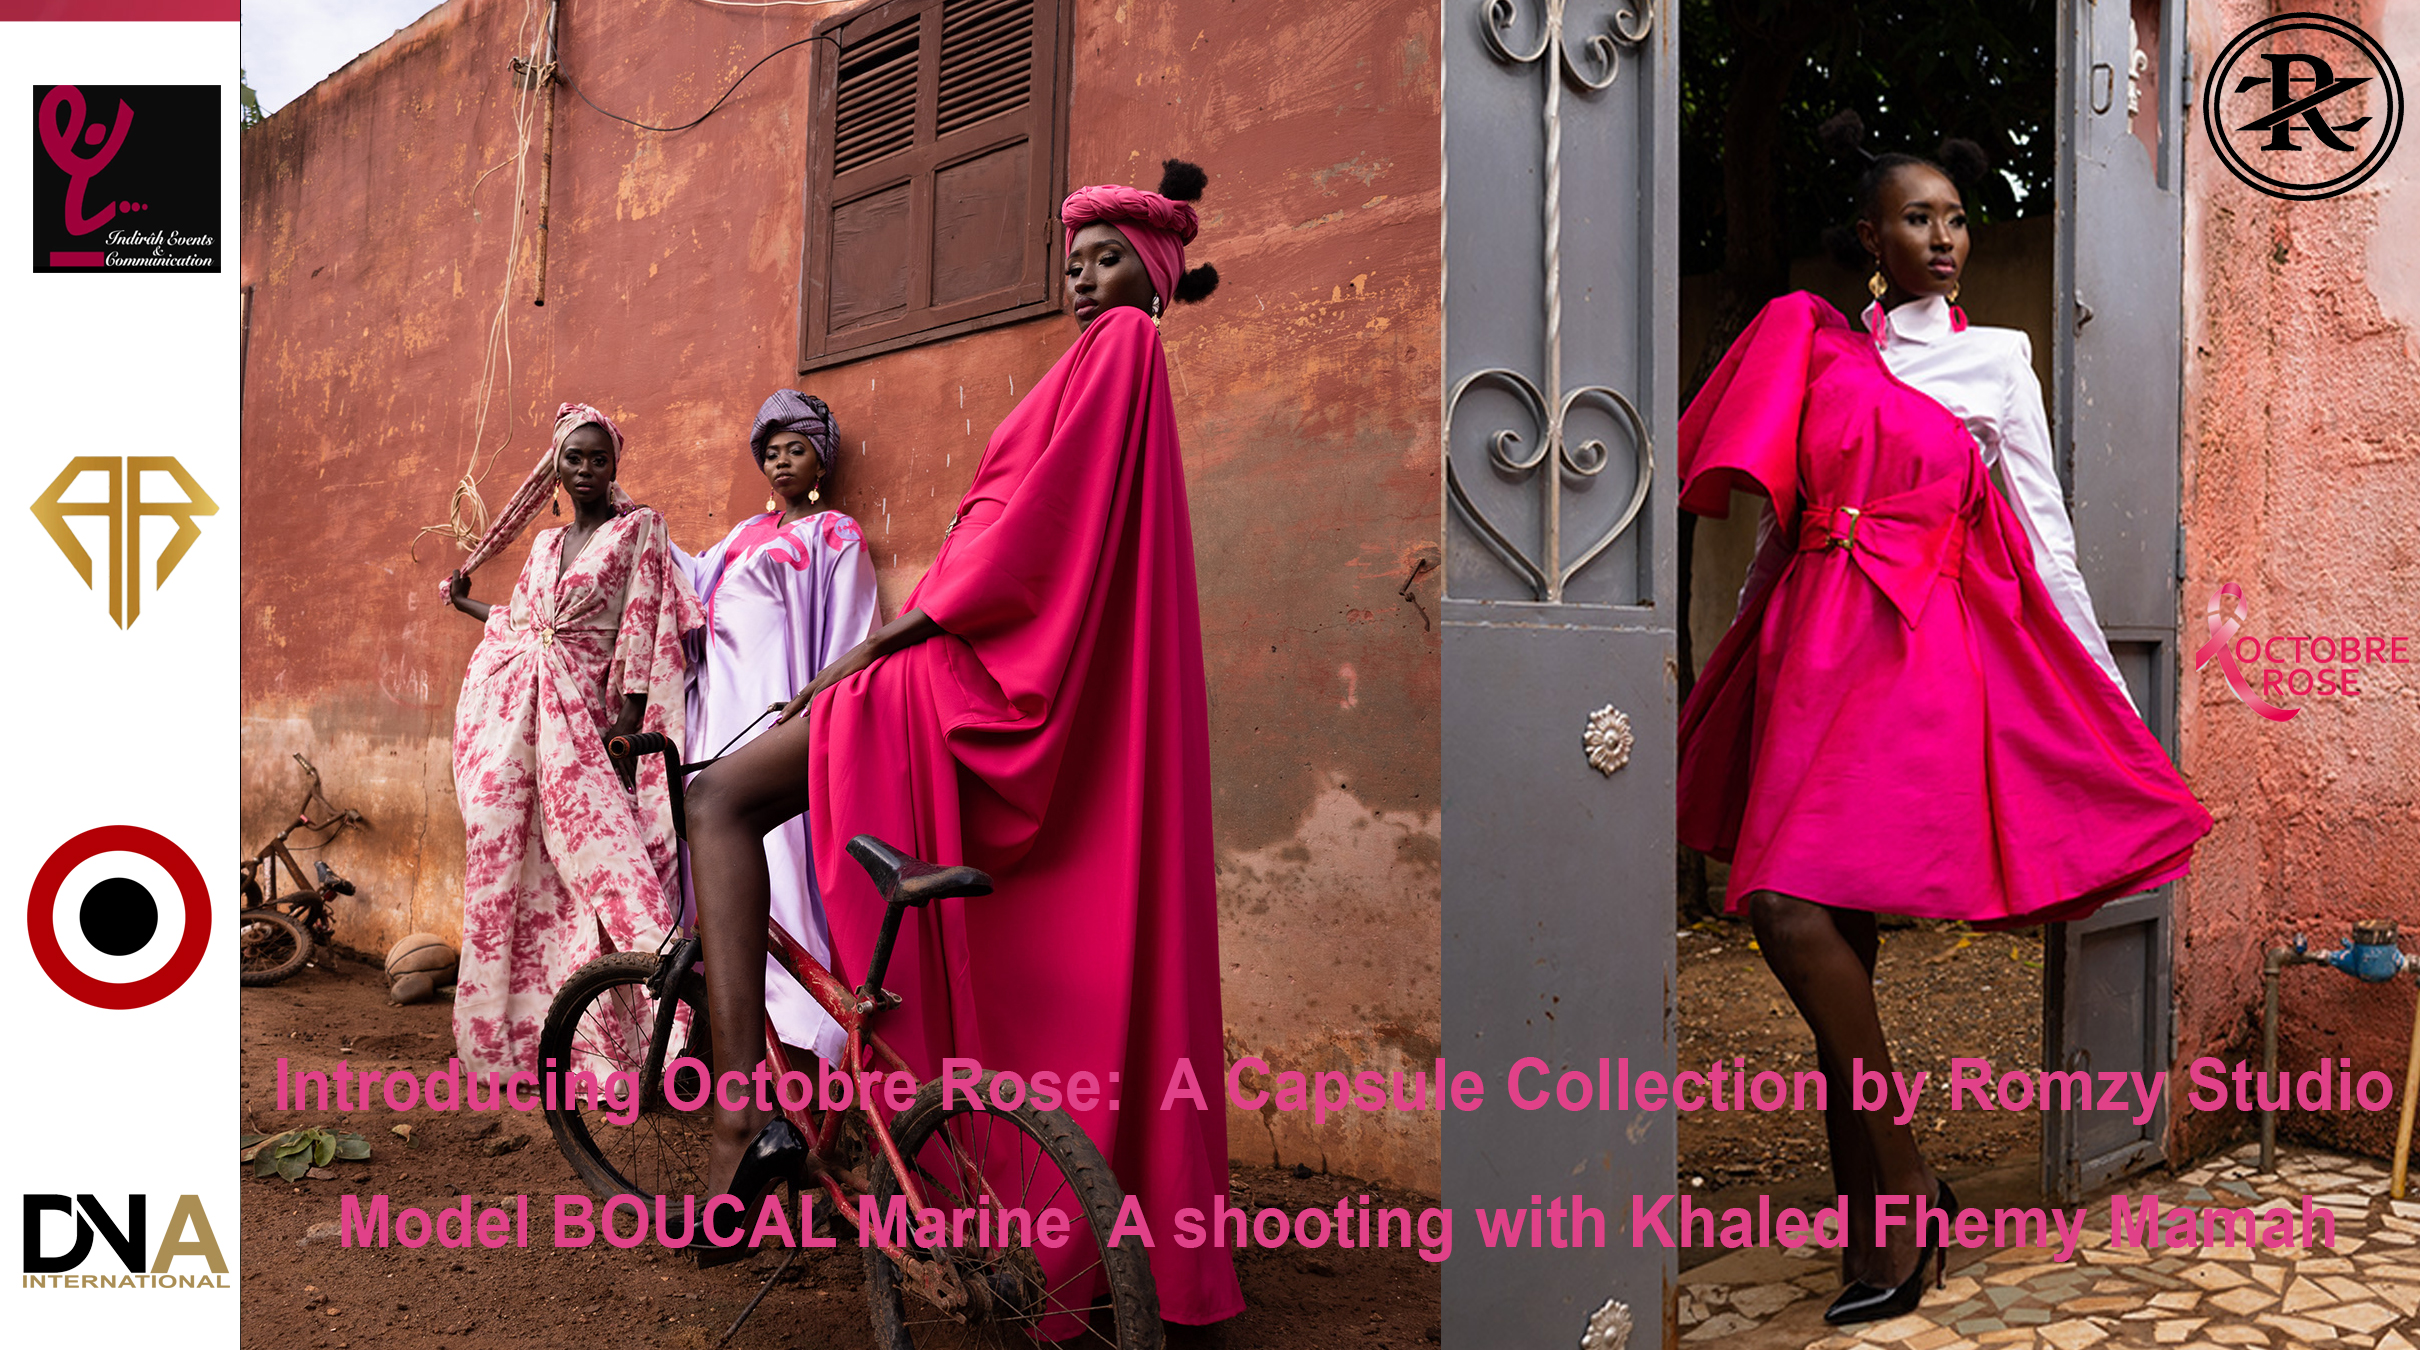 AFRICA-VOGUE-COVER-Introducing-Octobre-Rose-A-Capsule-Collection-by-Romzy-Studio-Model-BOUCAL-Marine-A-shooting-with-Khaled-Fhemy-Mamah -DN-AFRICA-MEDIA-PARTNER